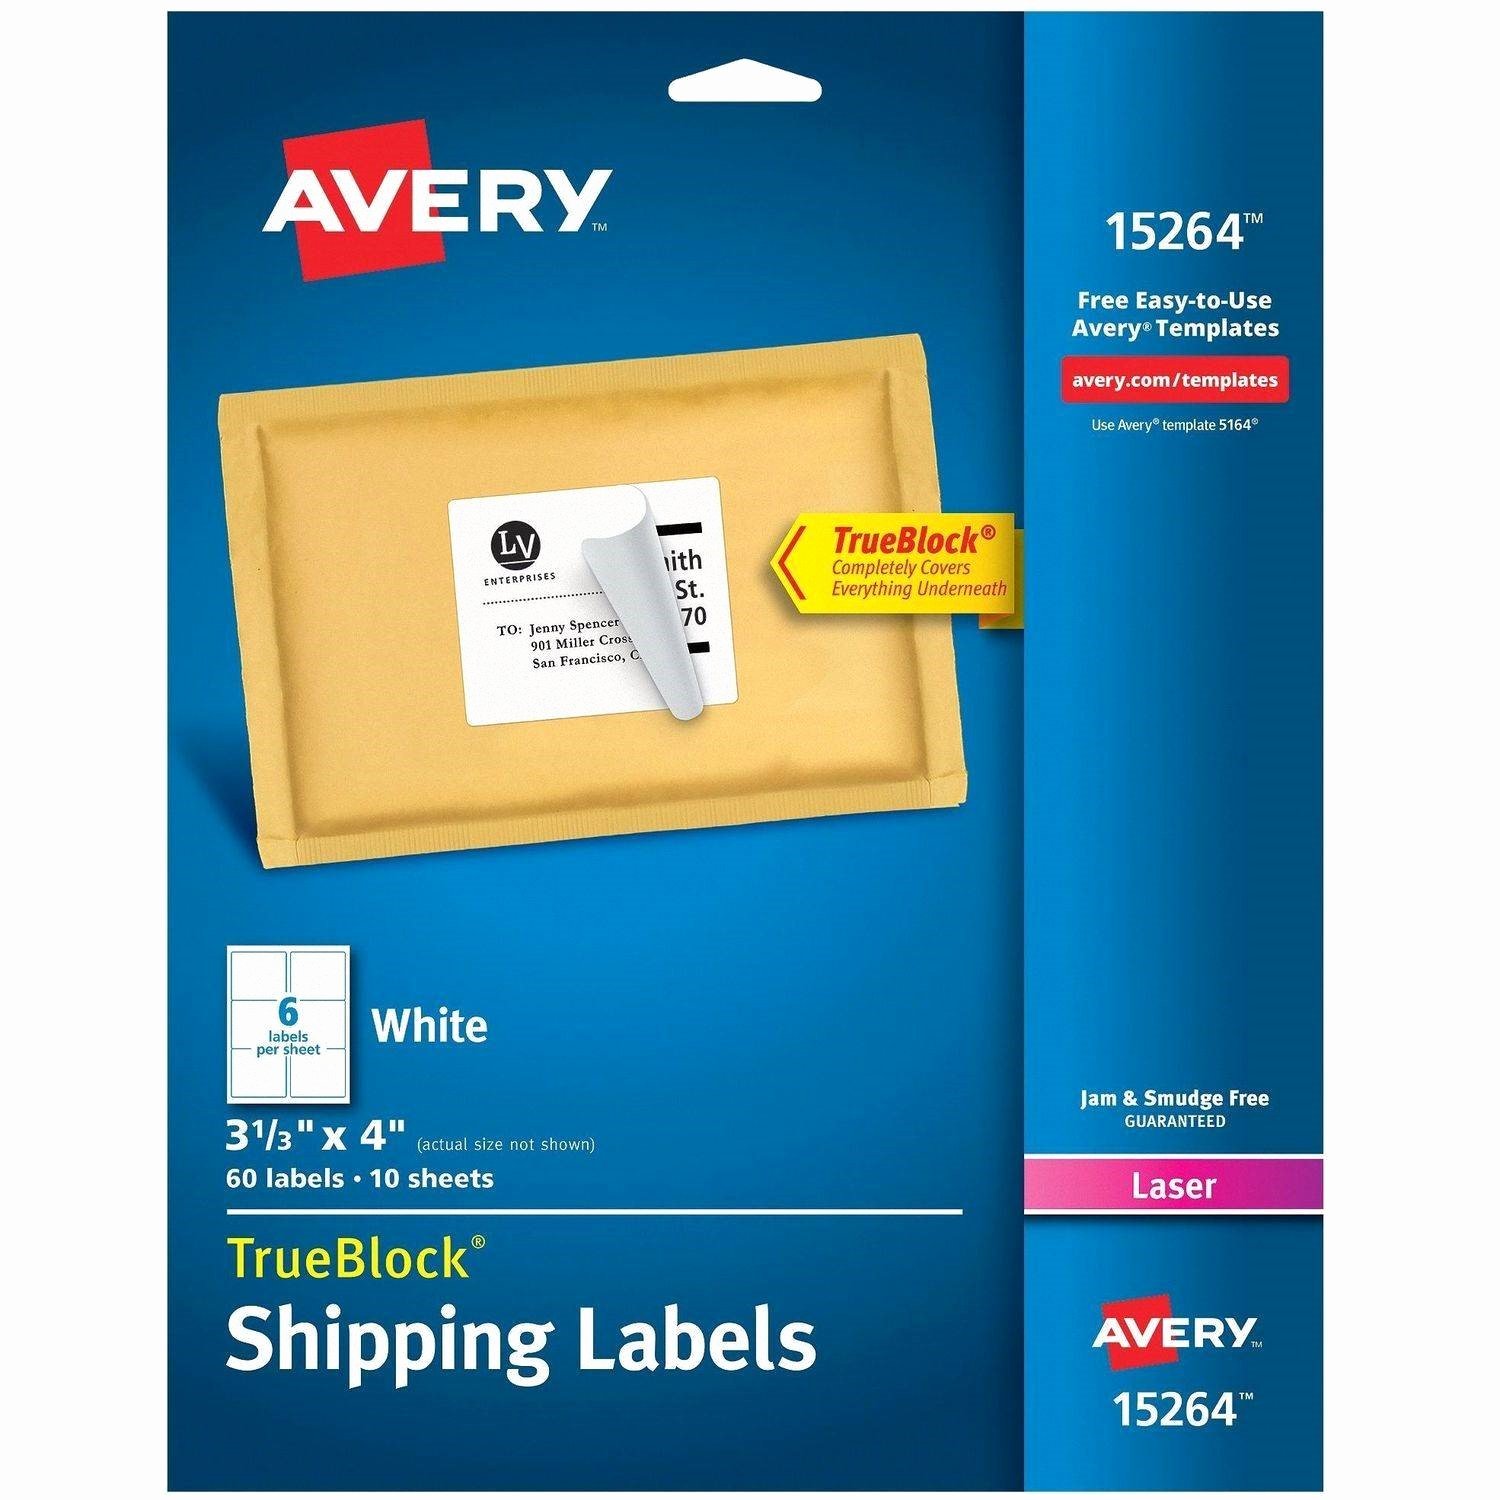 Avery White Shipping Labels with Trueblock Technology